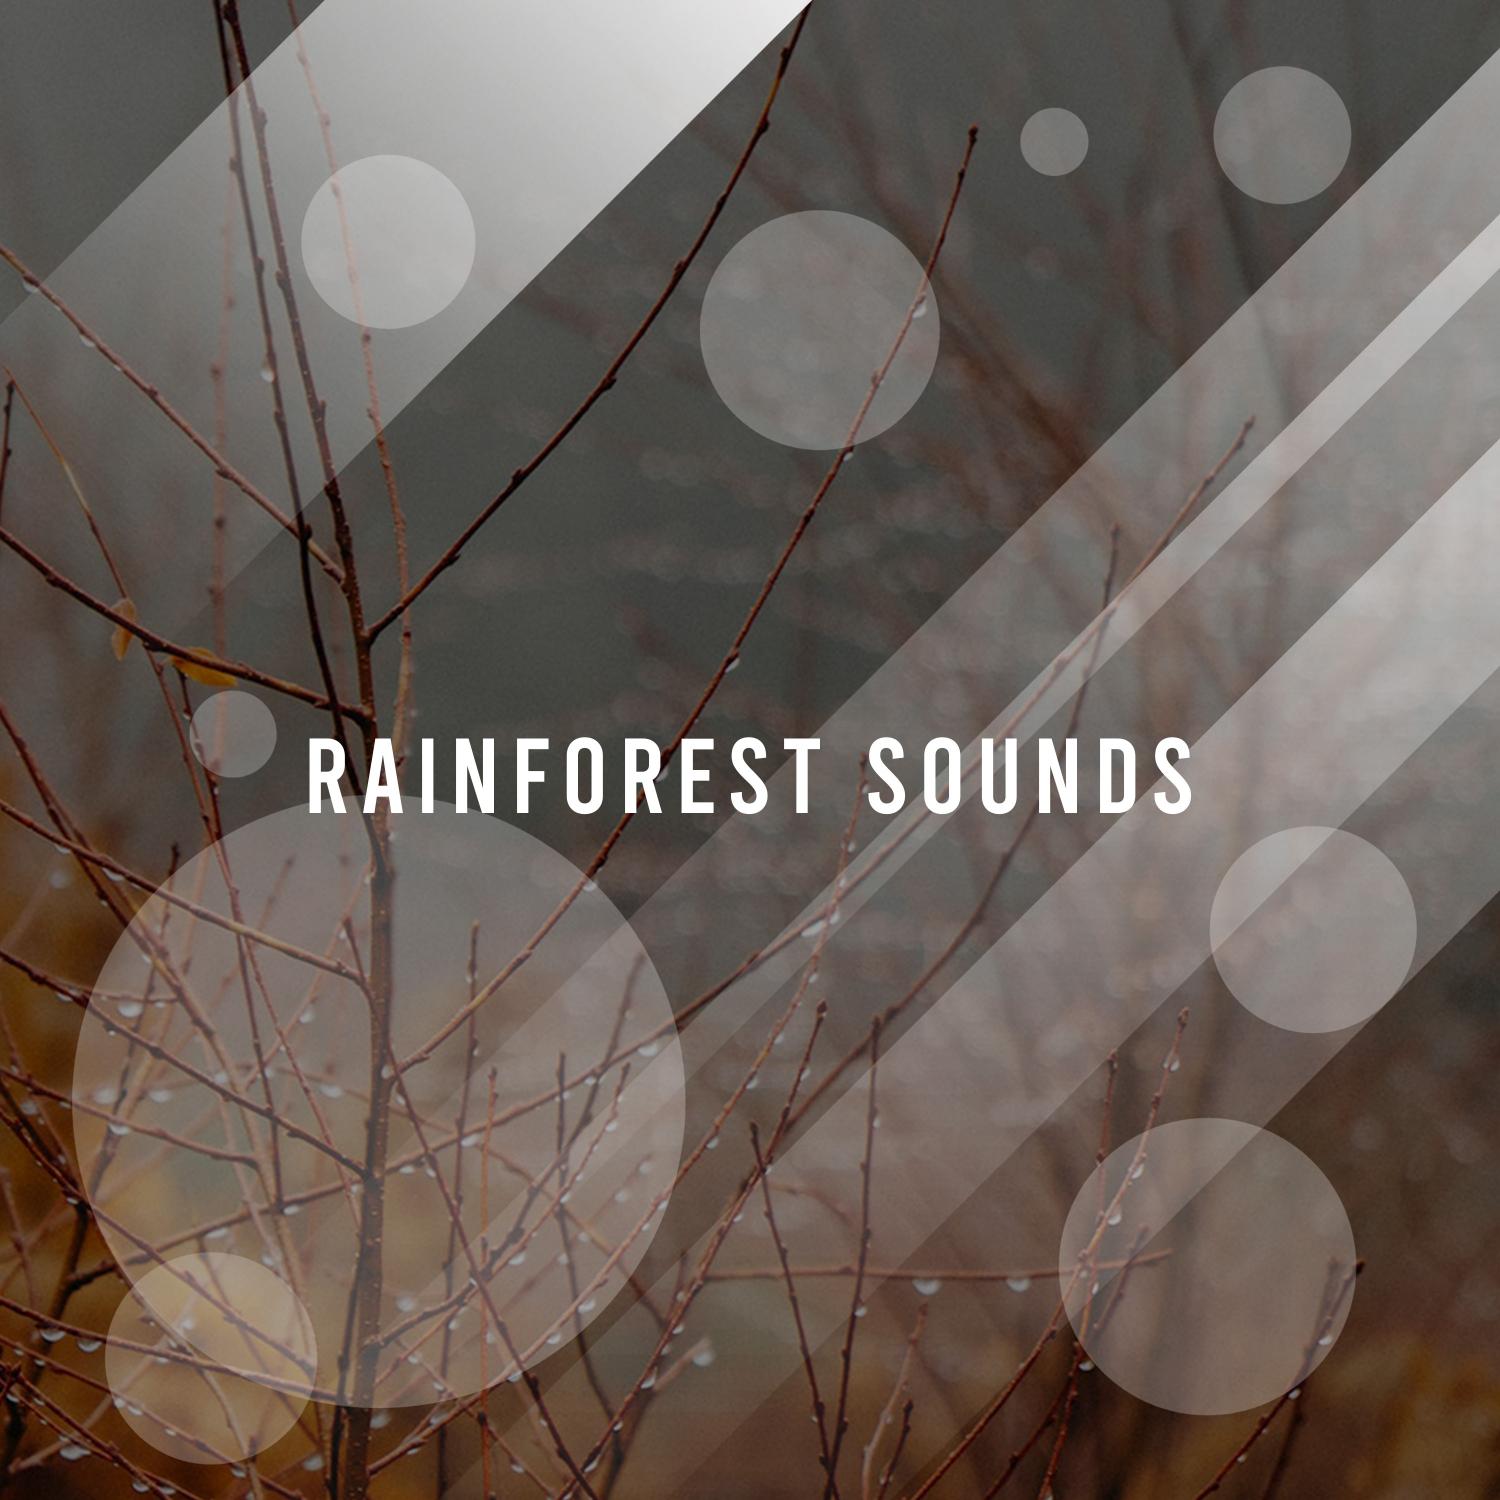 18 Sounds of Rainfor Stress Relief, Insomnia, Sleep and Wellbeing